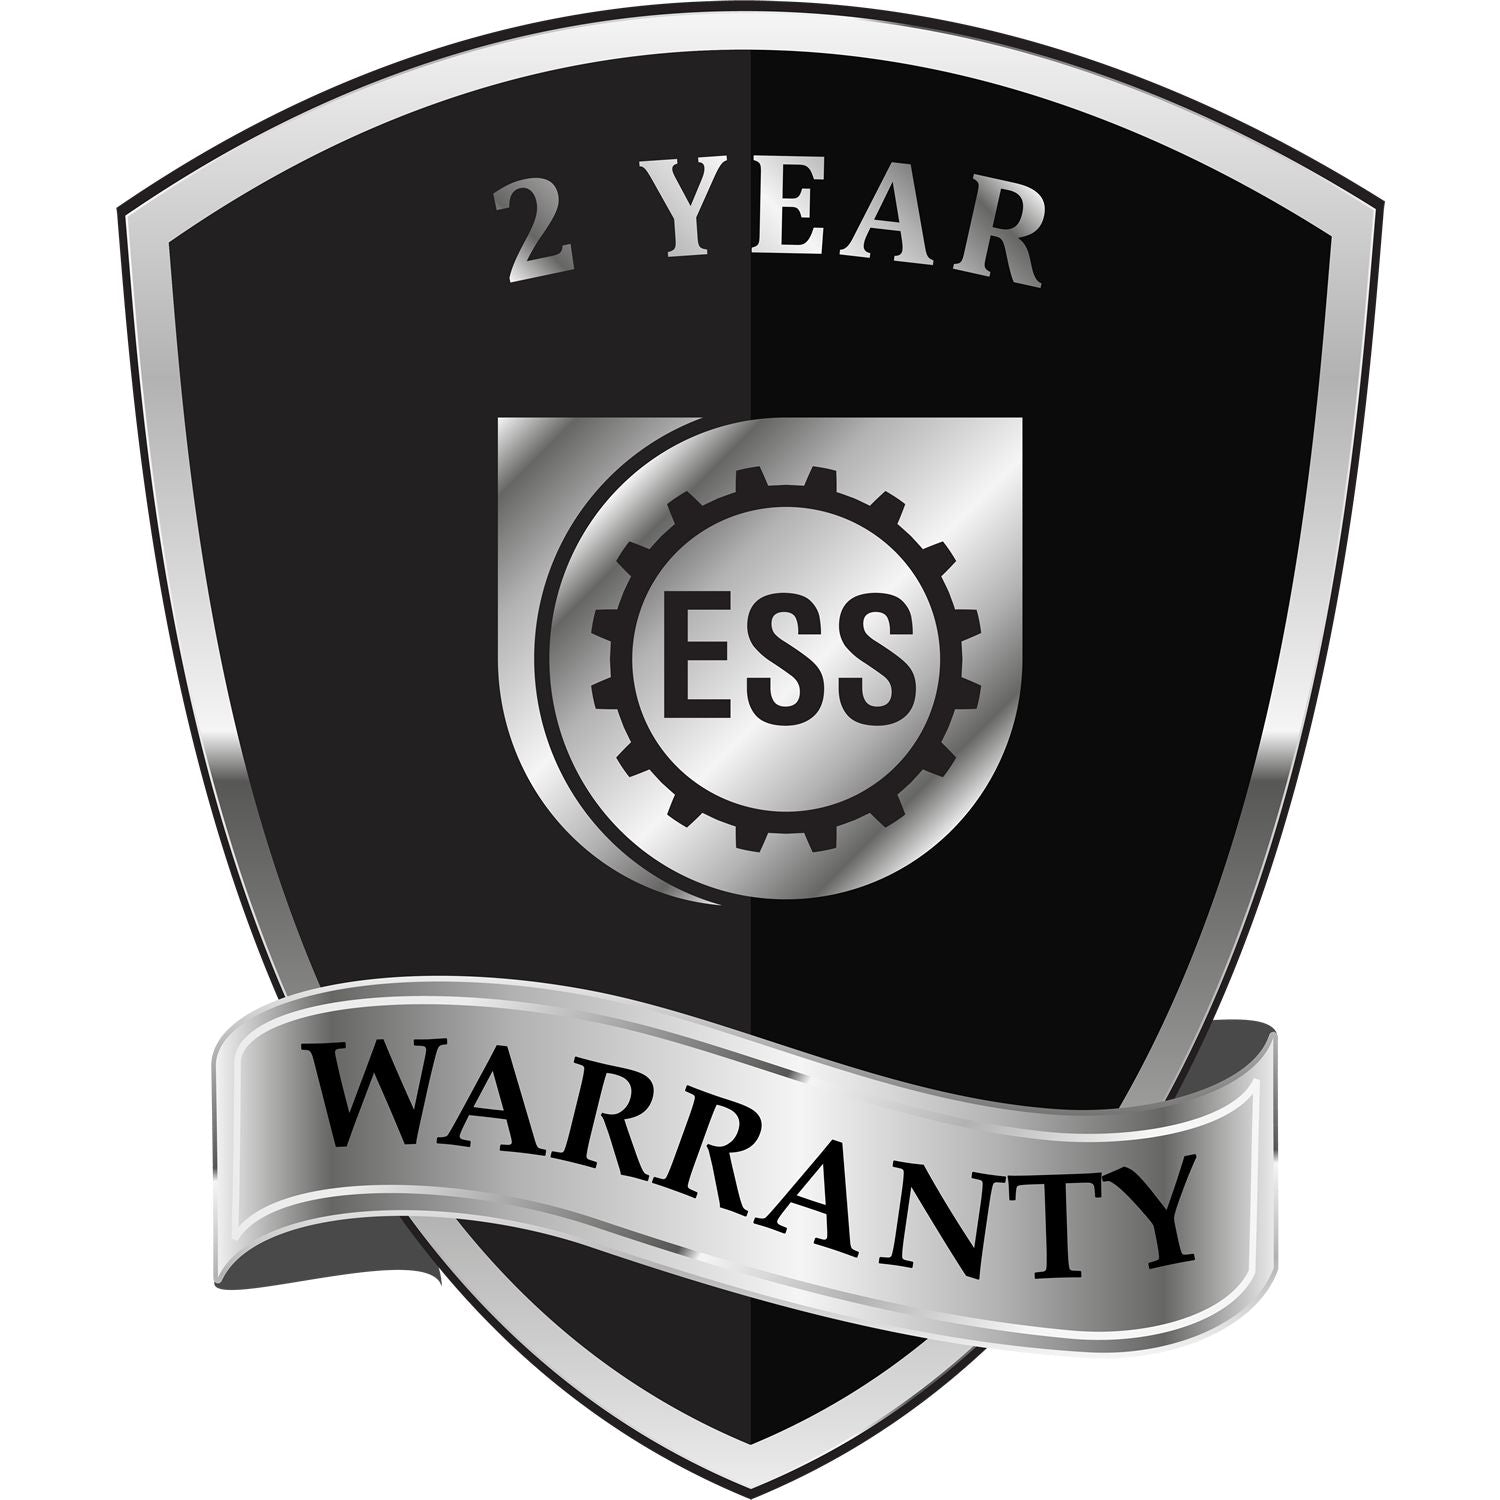 A badge or emblem showing a warranty icon for the State of Arkansas Long Reach Architectural Embossing Seal